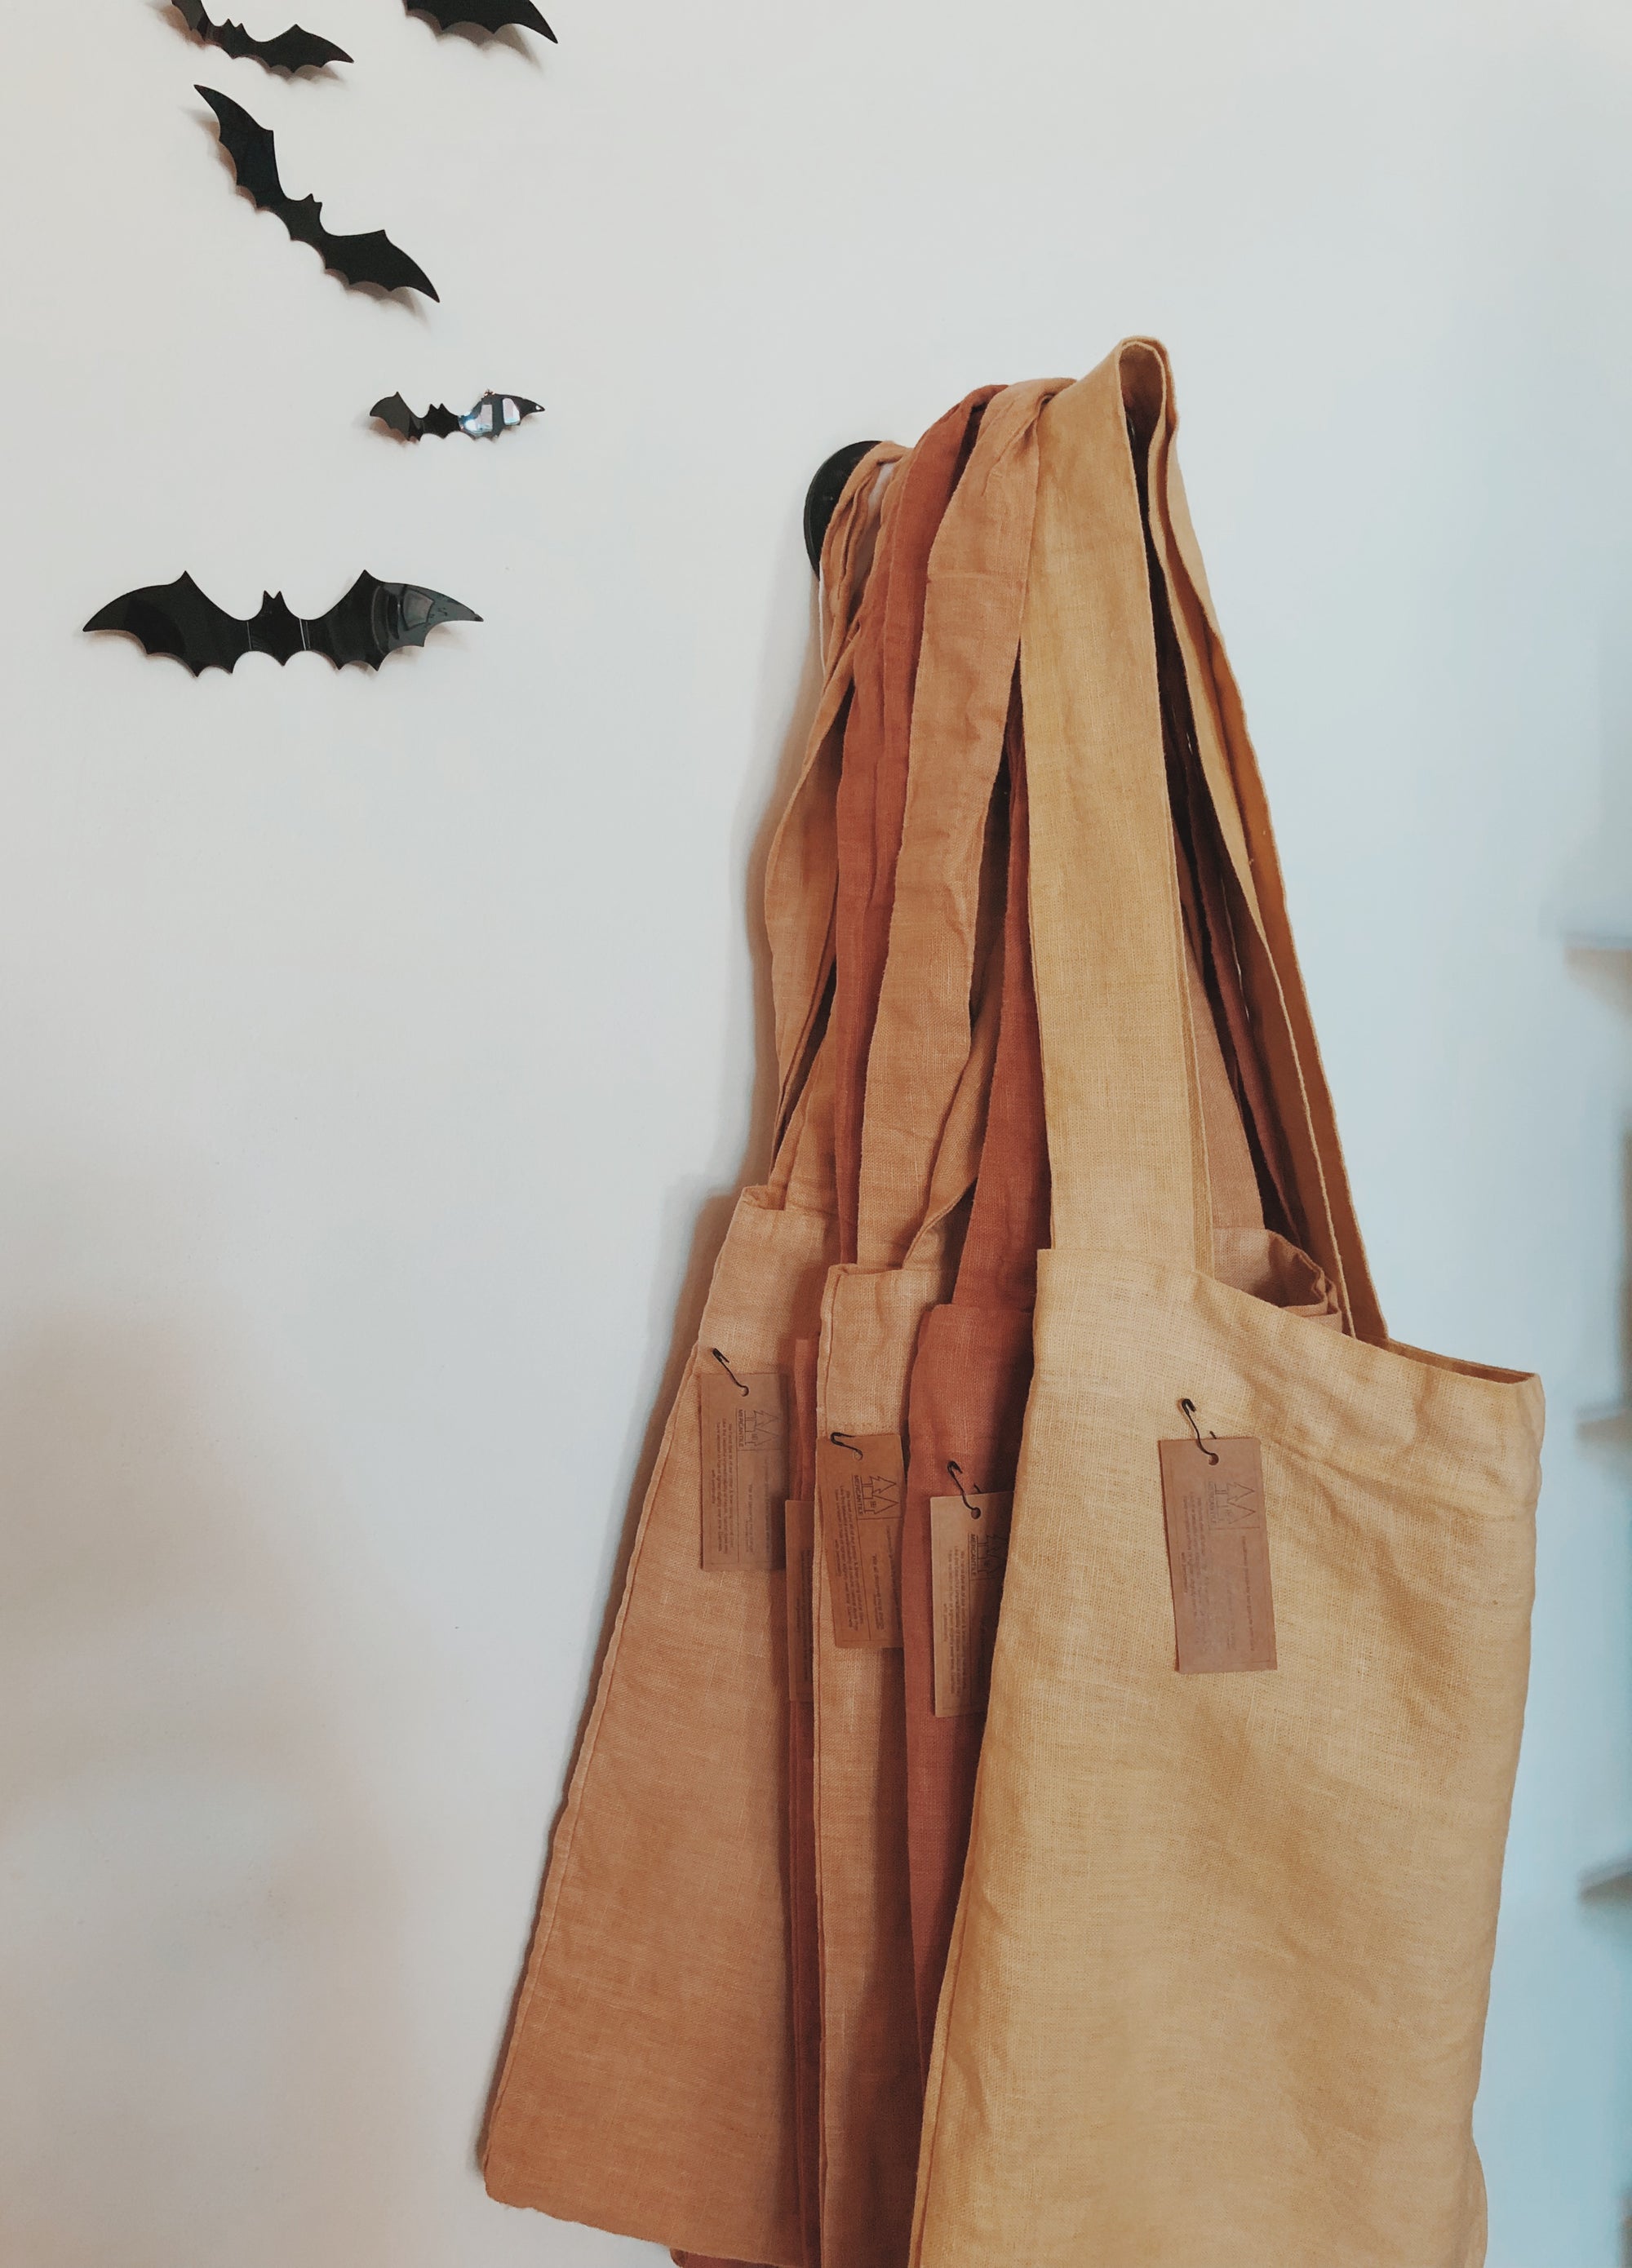 Naturally dyed Linen Tote